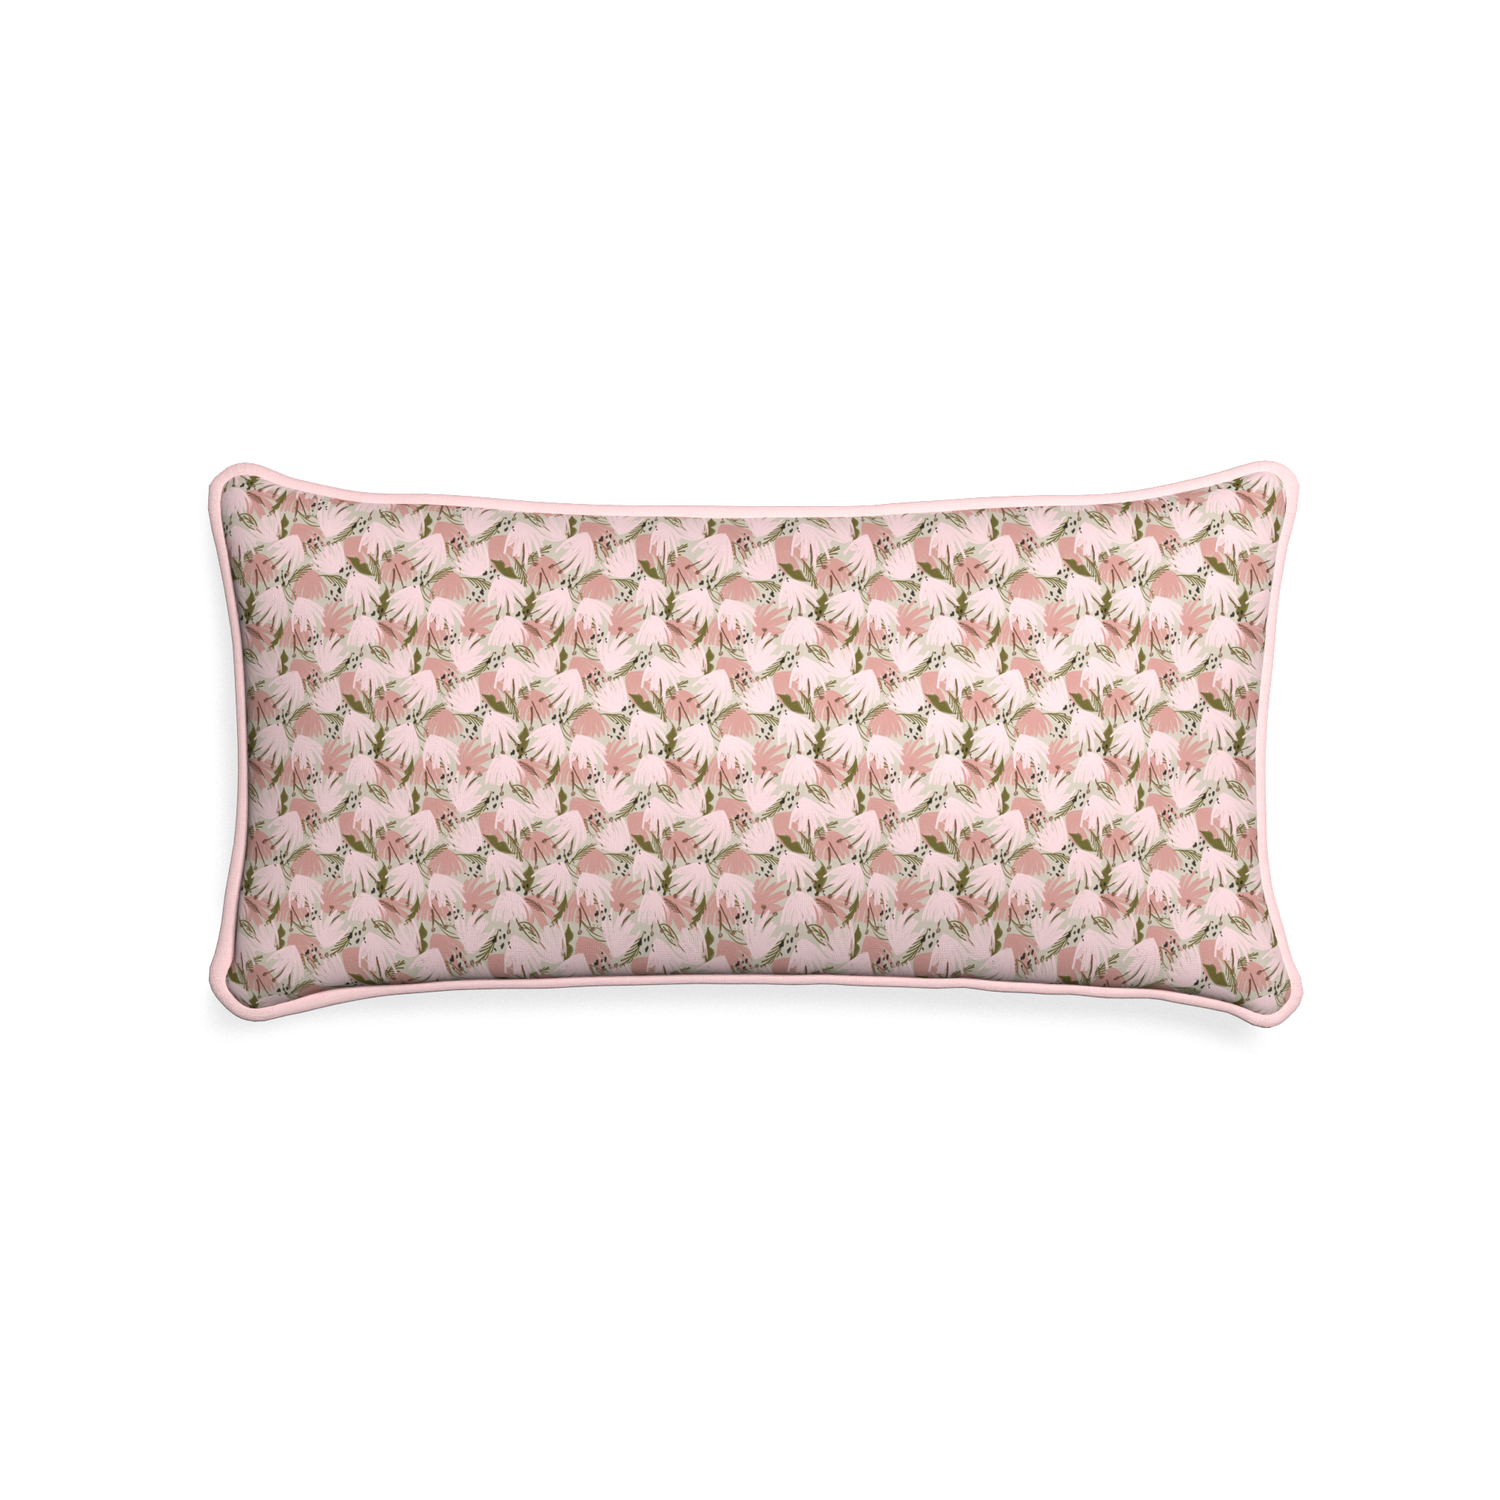 Midi-lumbar eden pink custom pink floralpillow with petal piping on white background